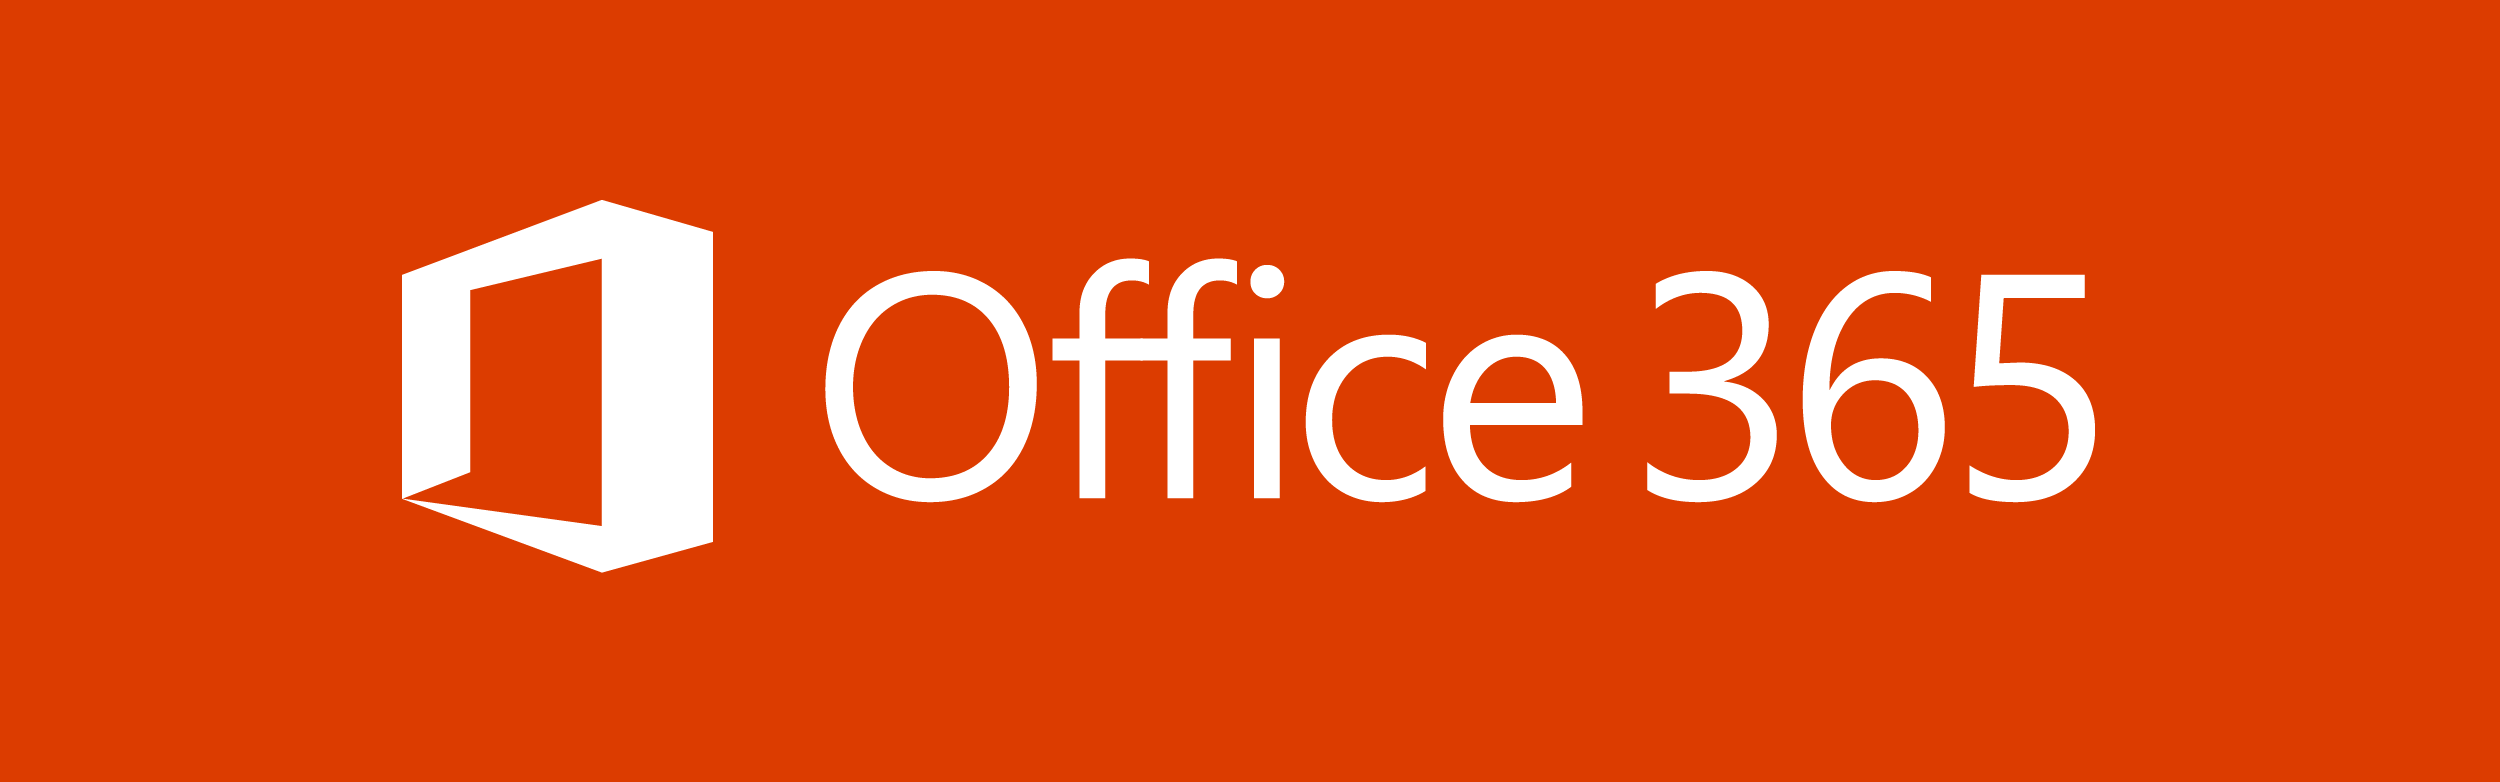 Office 365 Log In – Information Technology Services